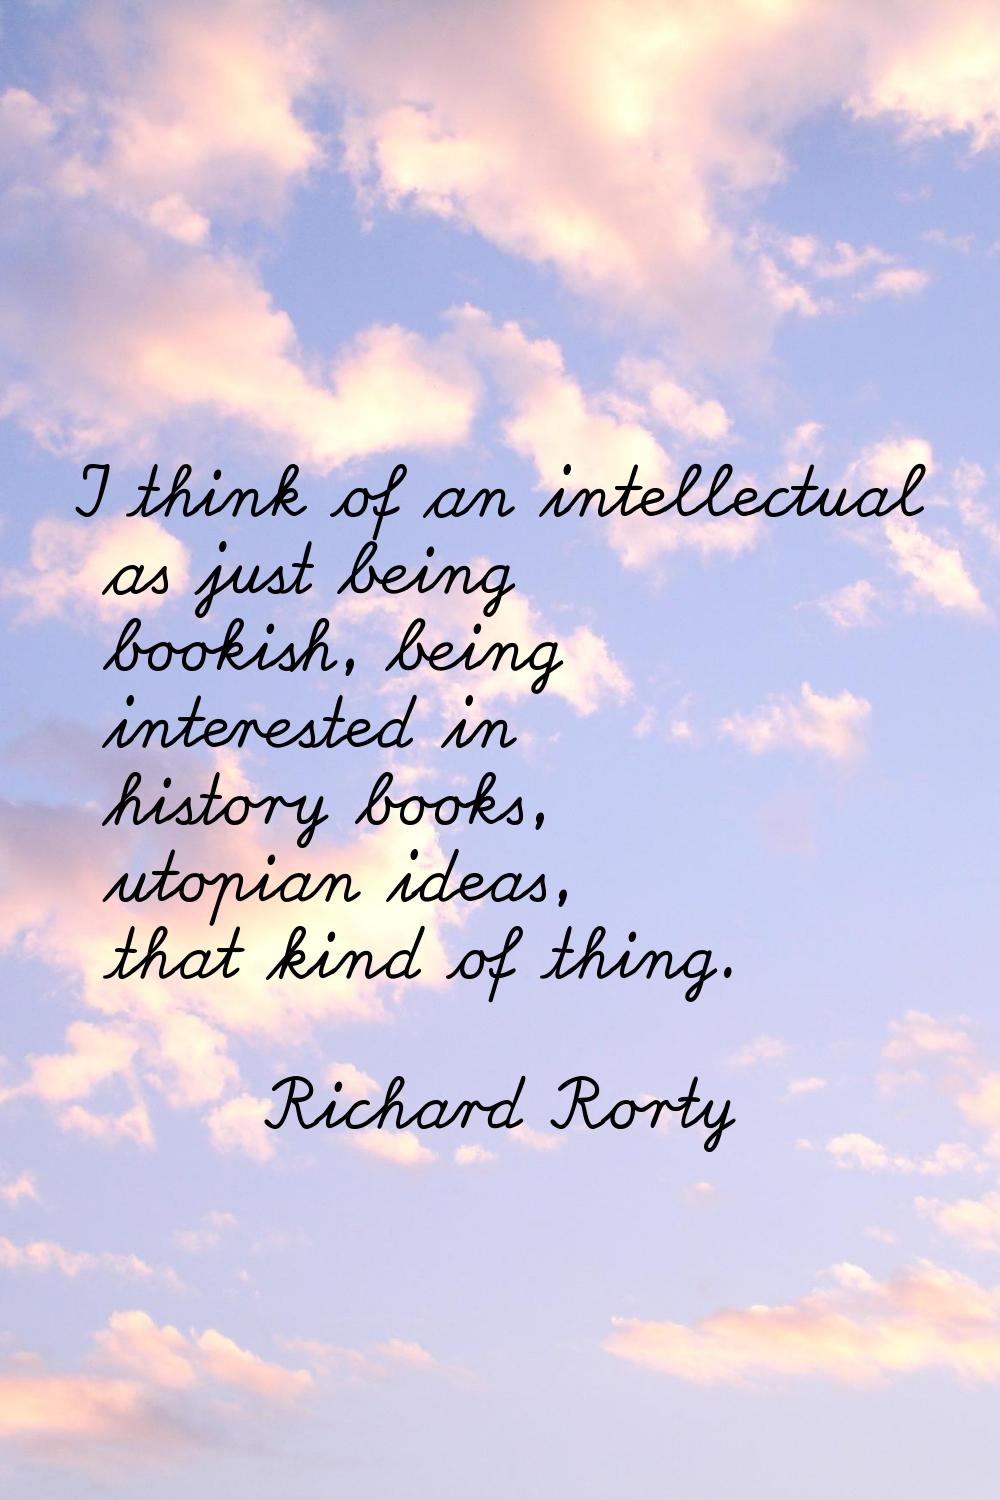 I think of an intellectual as just being bookish, being interested in history books, utopian ideas,